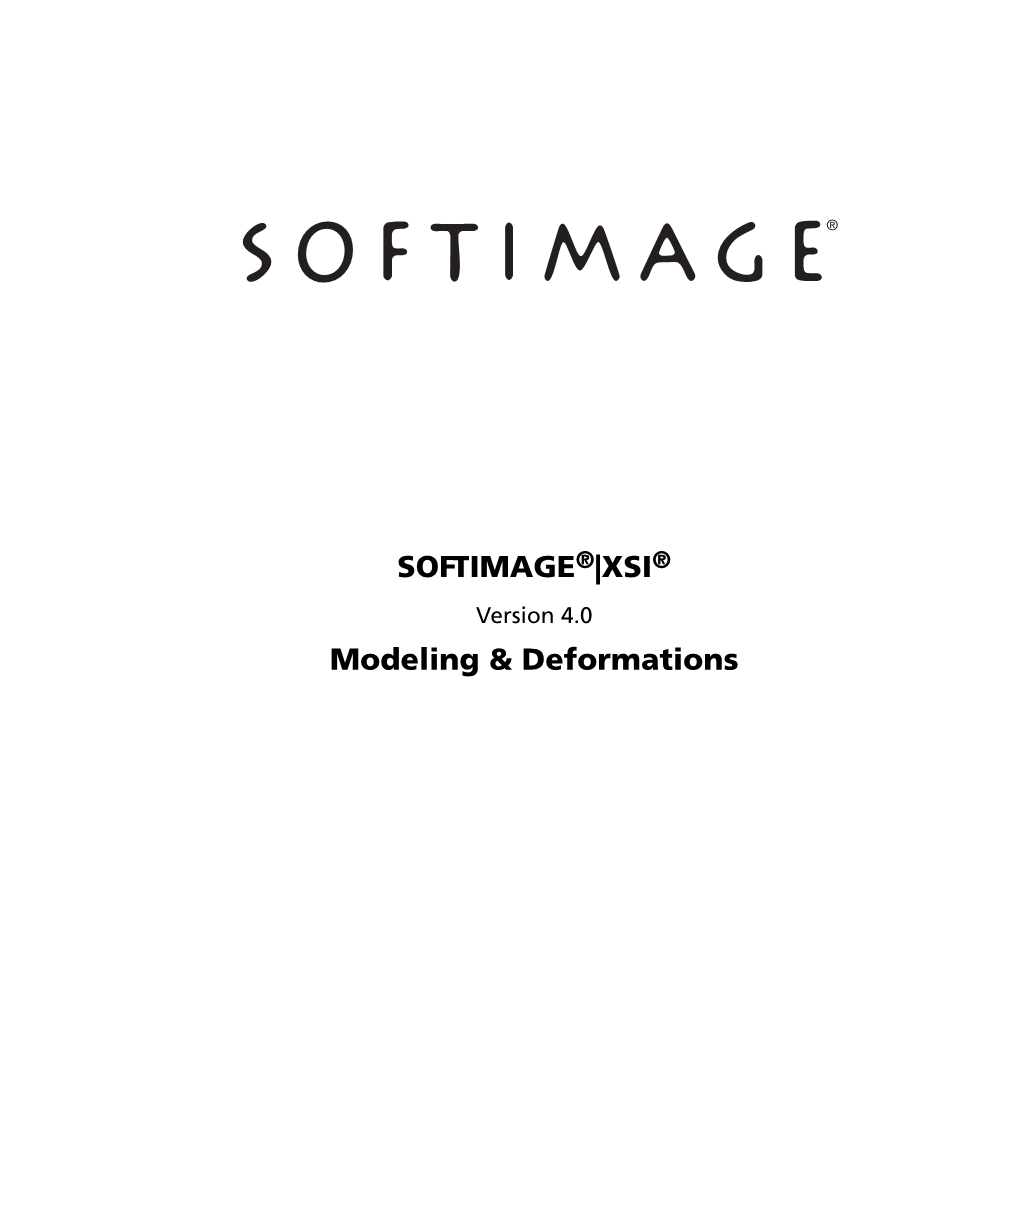 SOFTIMAGE|XSI Application Uses Jscript and Visual Basic Scripting Edition from Microsoft Corporation